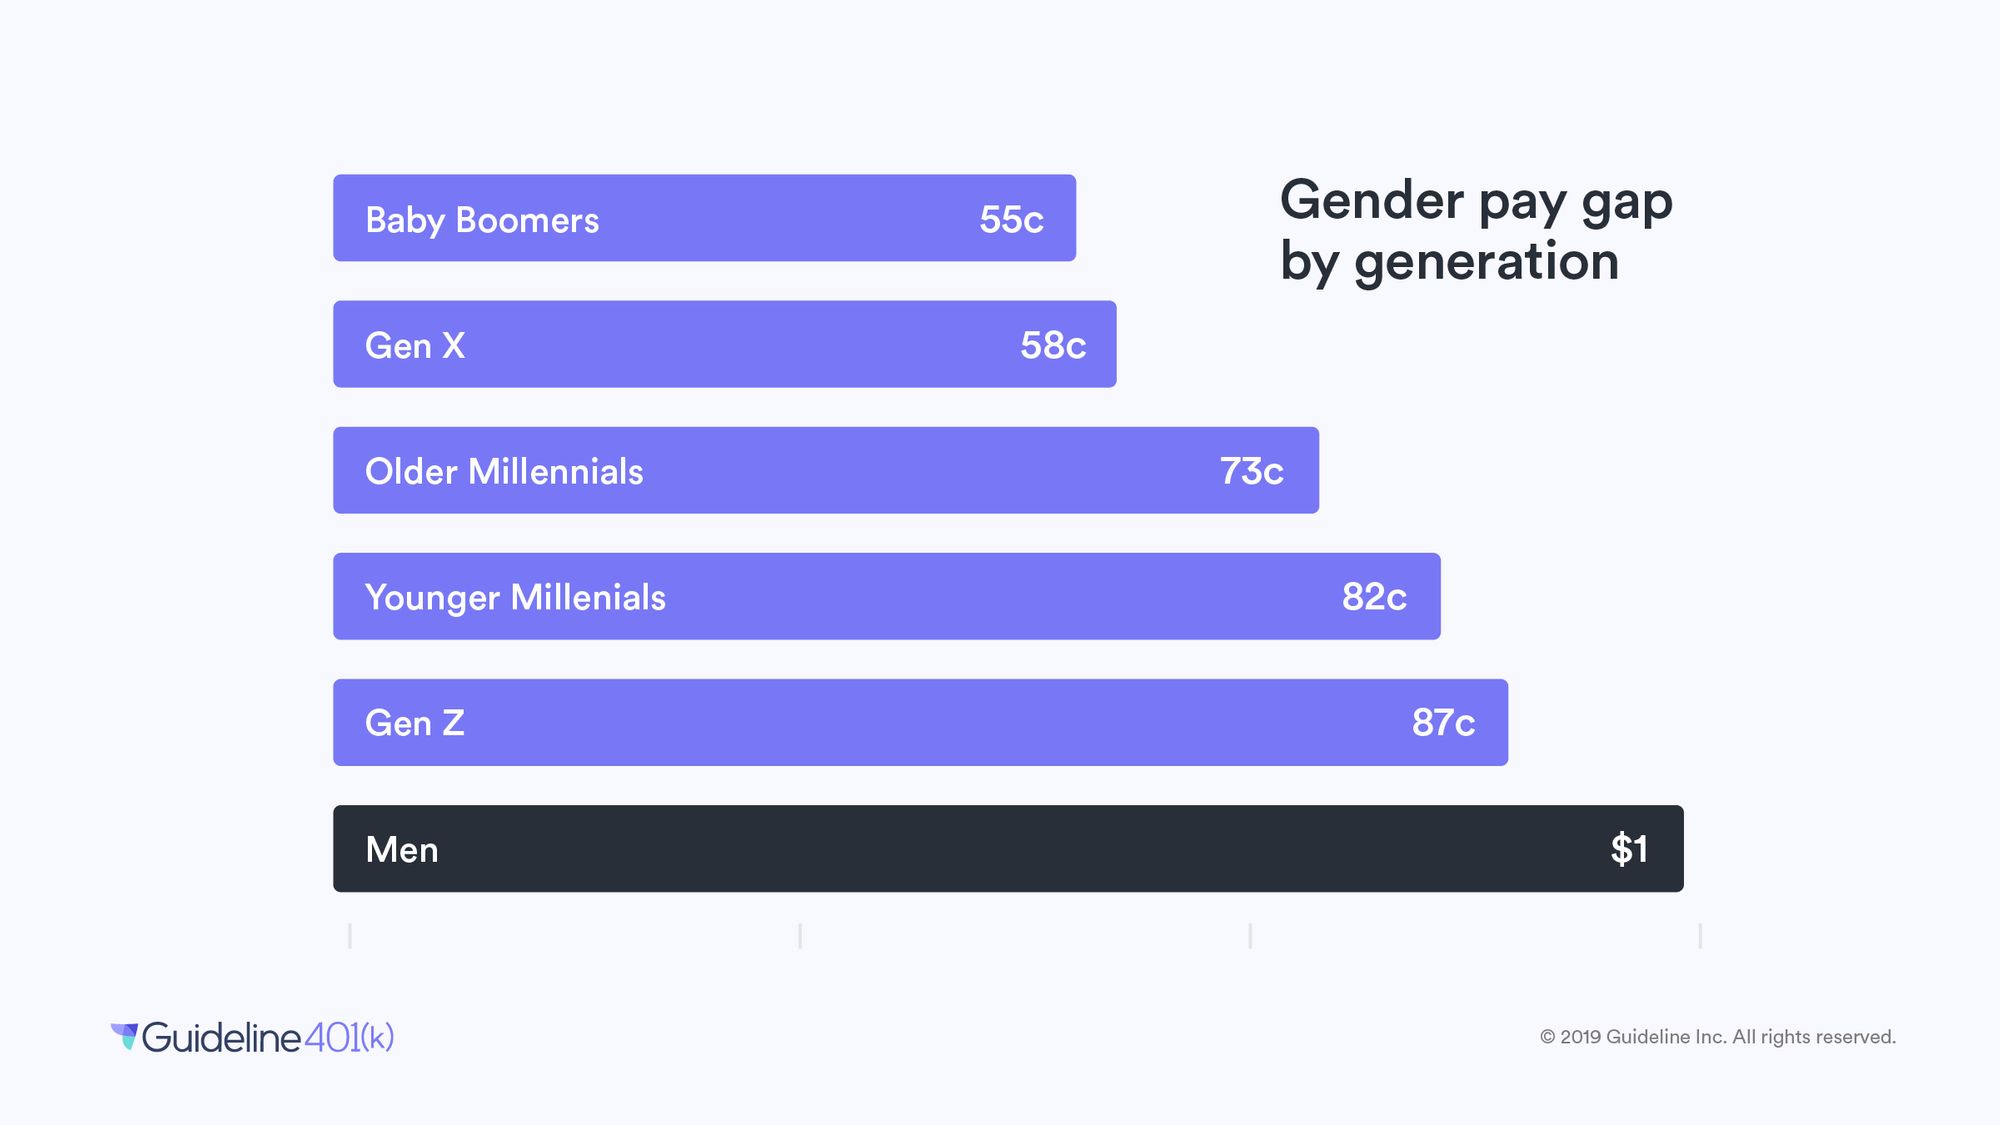 Gender pay gap by generation